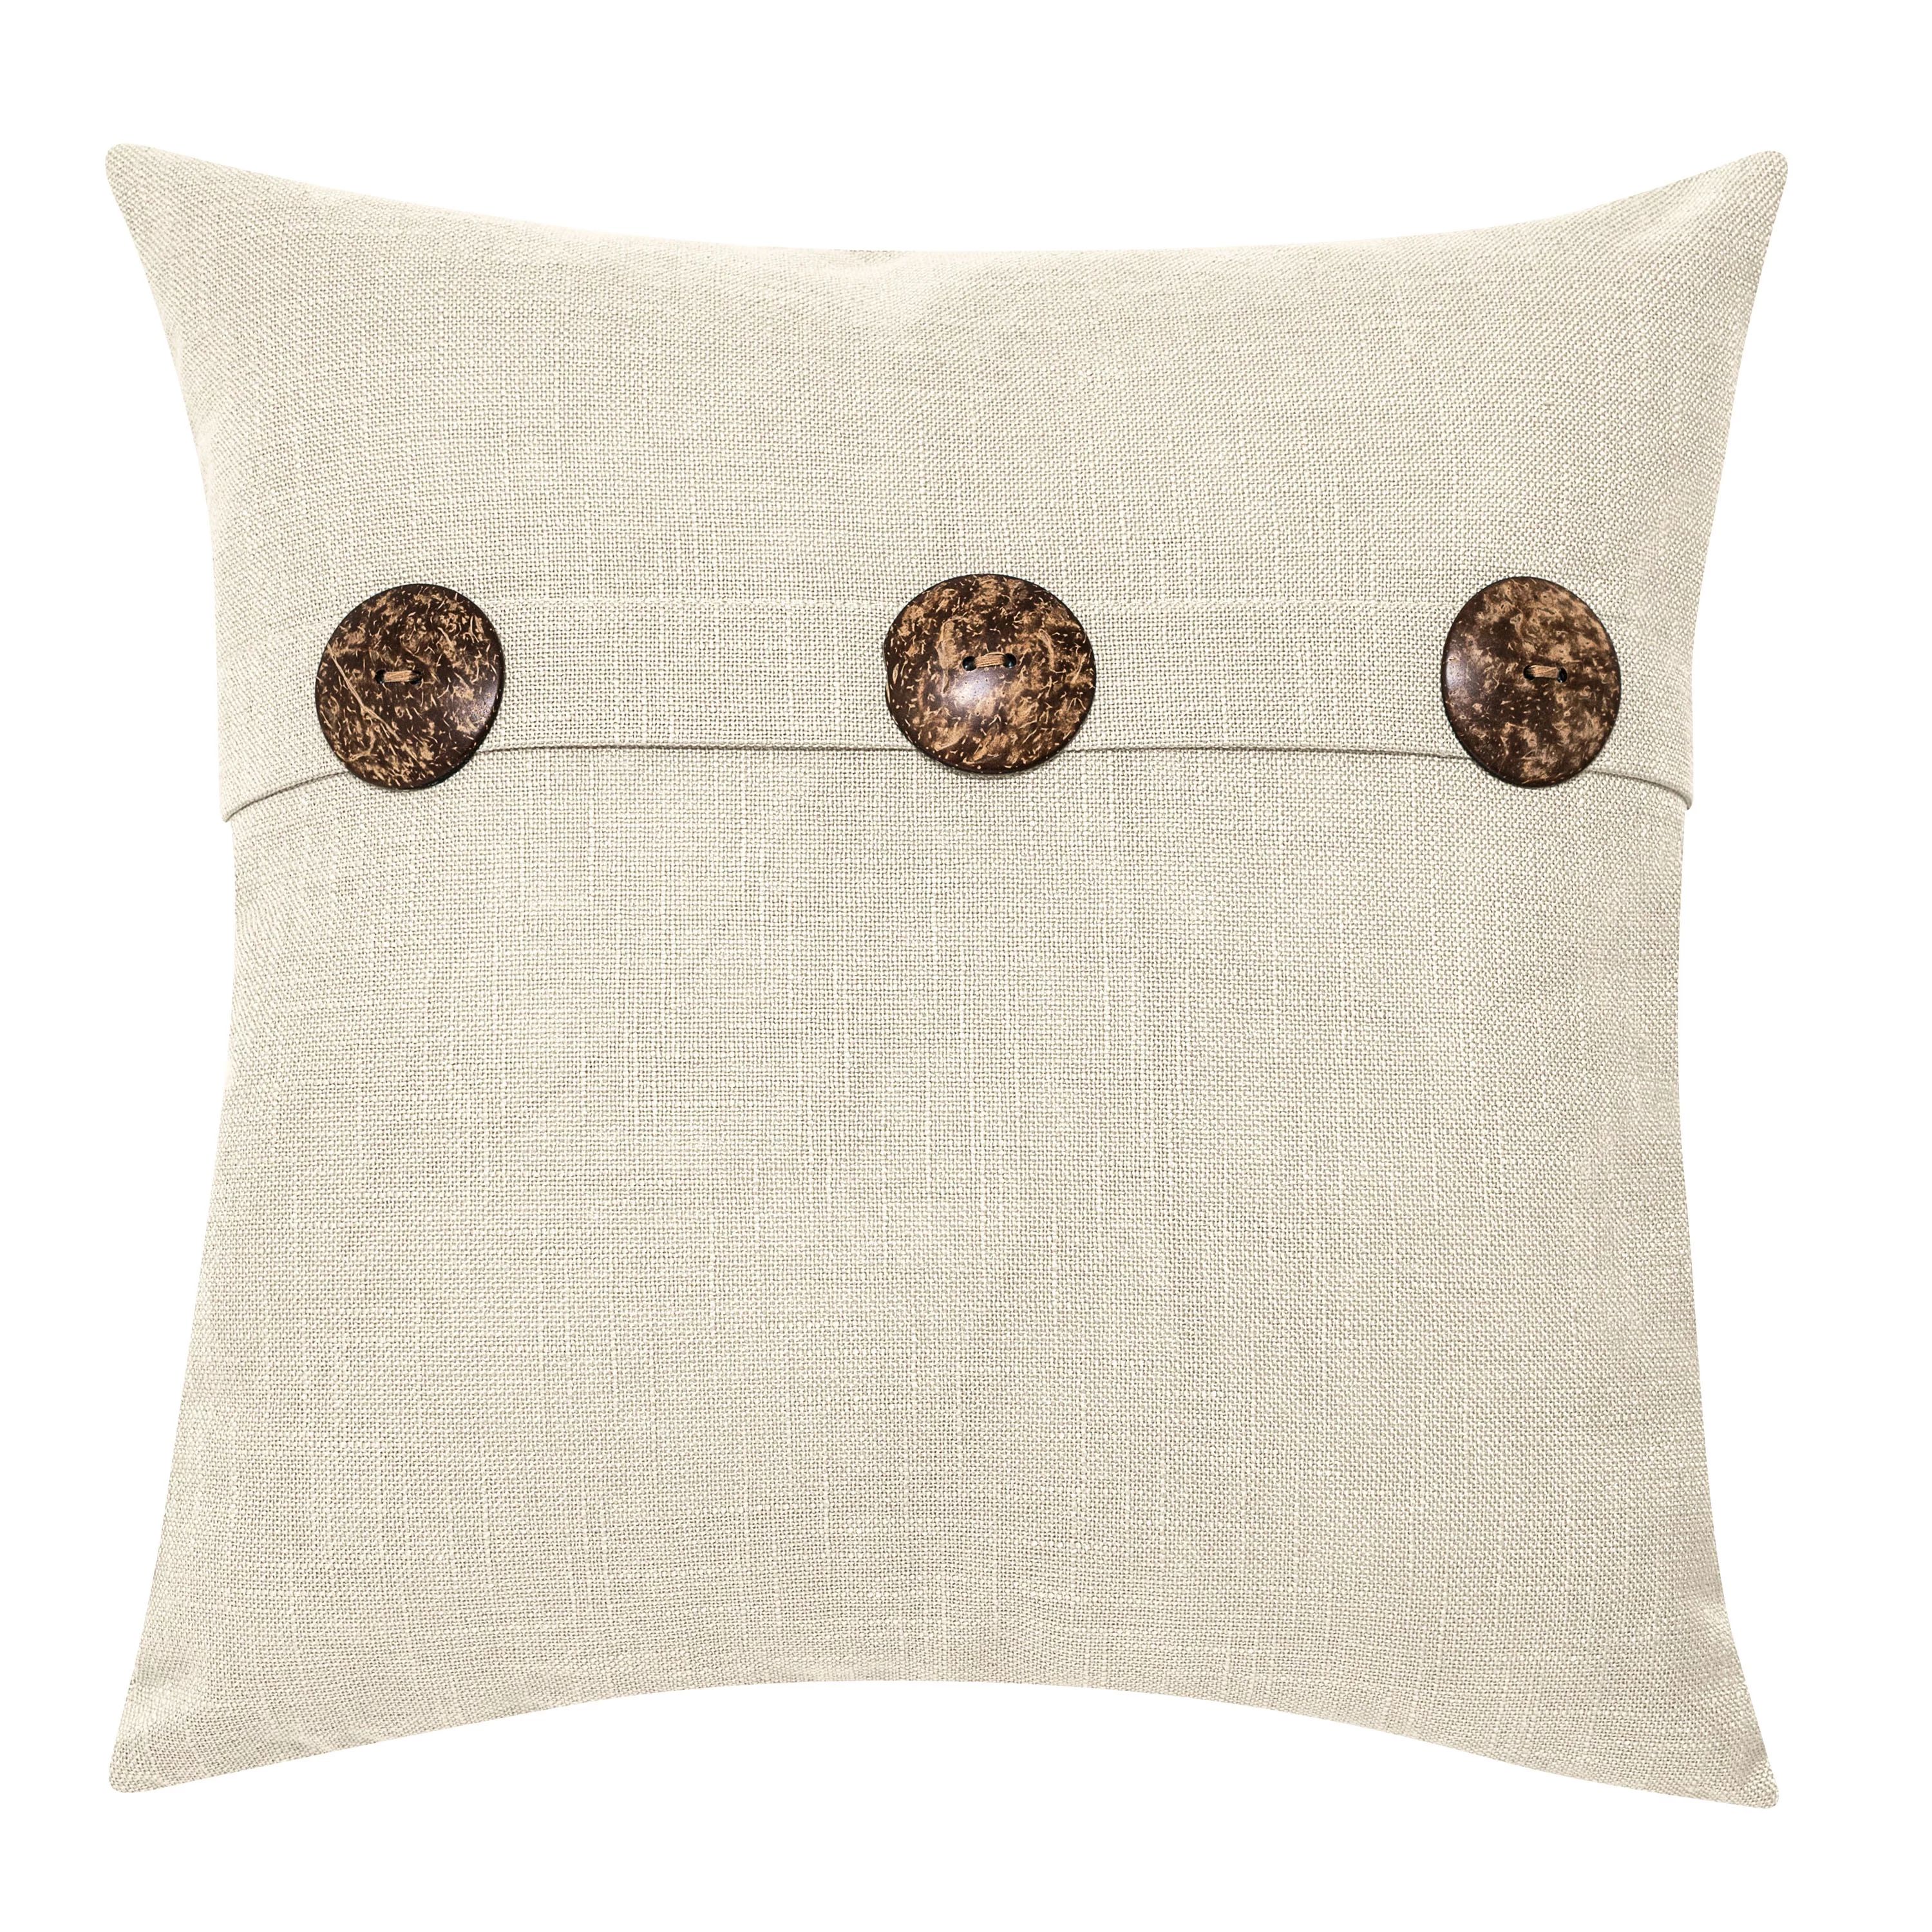 Better Homes & Gardens Feather Filled Three Button Decorative Throw Pillow, 20" x 20", Ivory | Walmart (US)